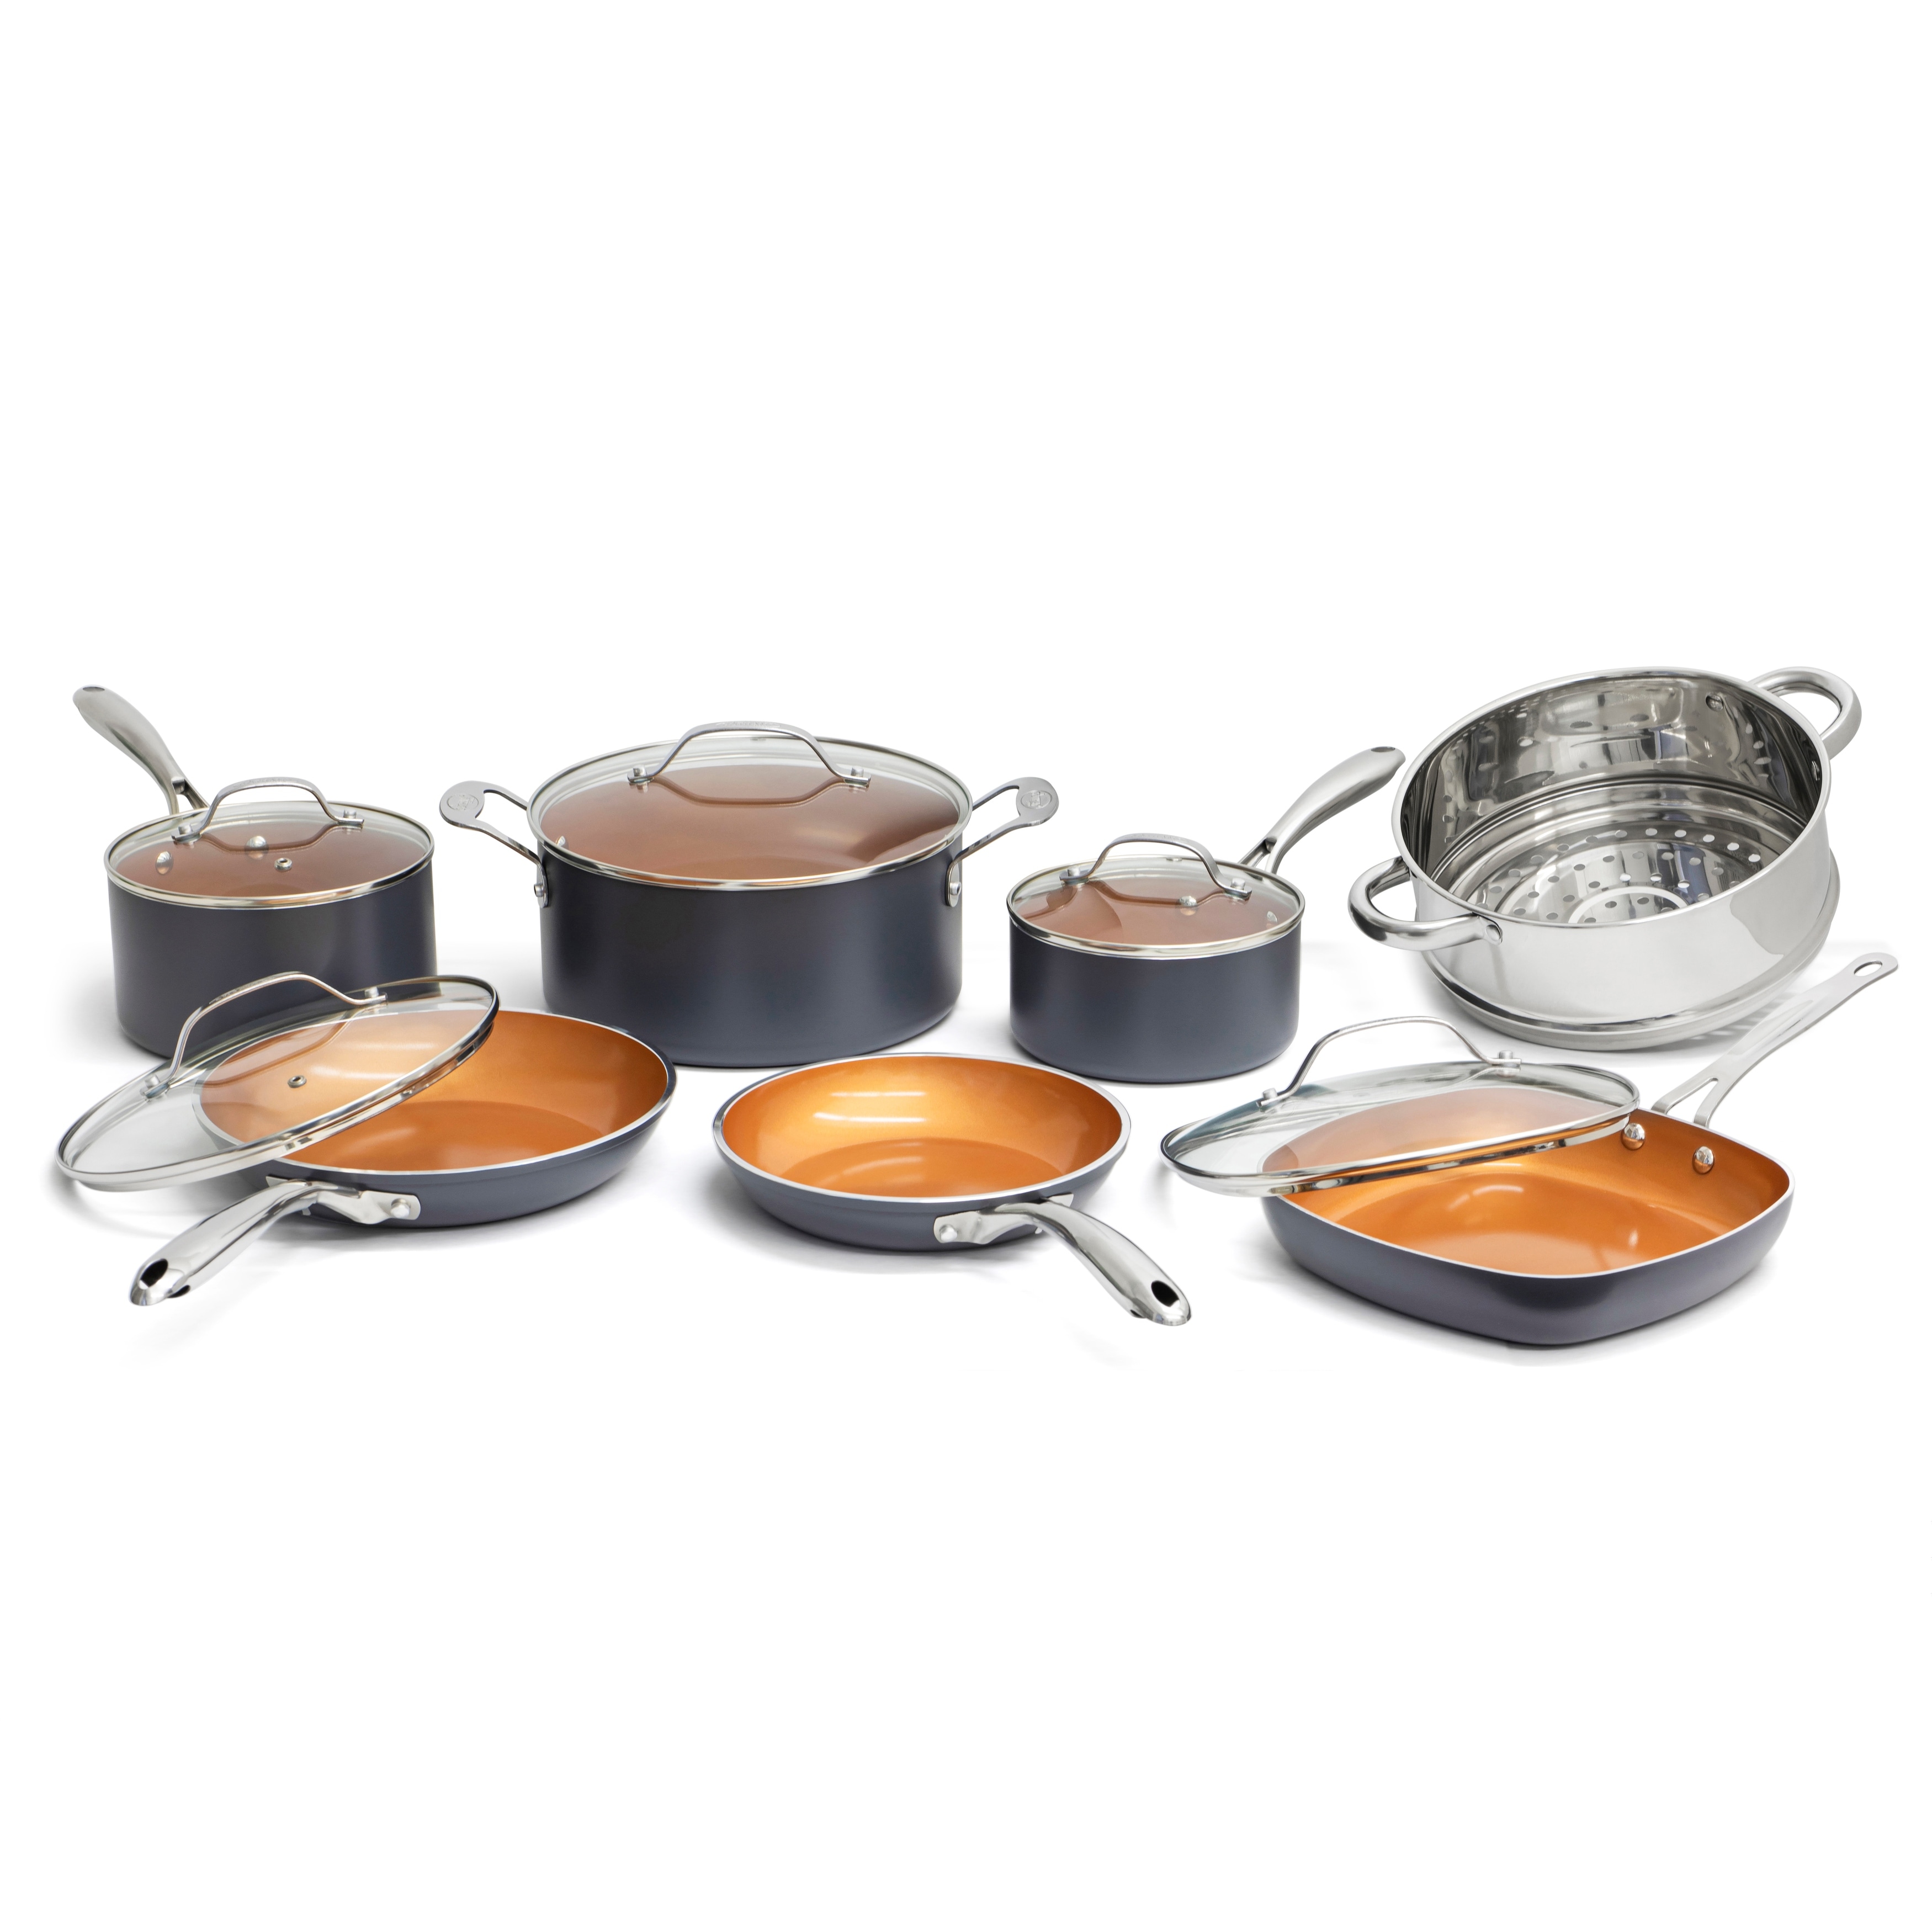 https://ak1.ostkcdn.com/images/products/is/images/direct/f56ca37fc76bf0b0ec3e8a3652d1d980dd75698e/Gotham-Steel-Diamond-12pc-Non-Stick-Cookware-Set.jpg